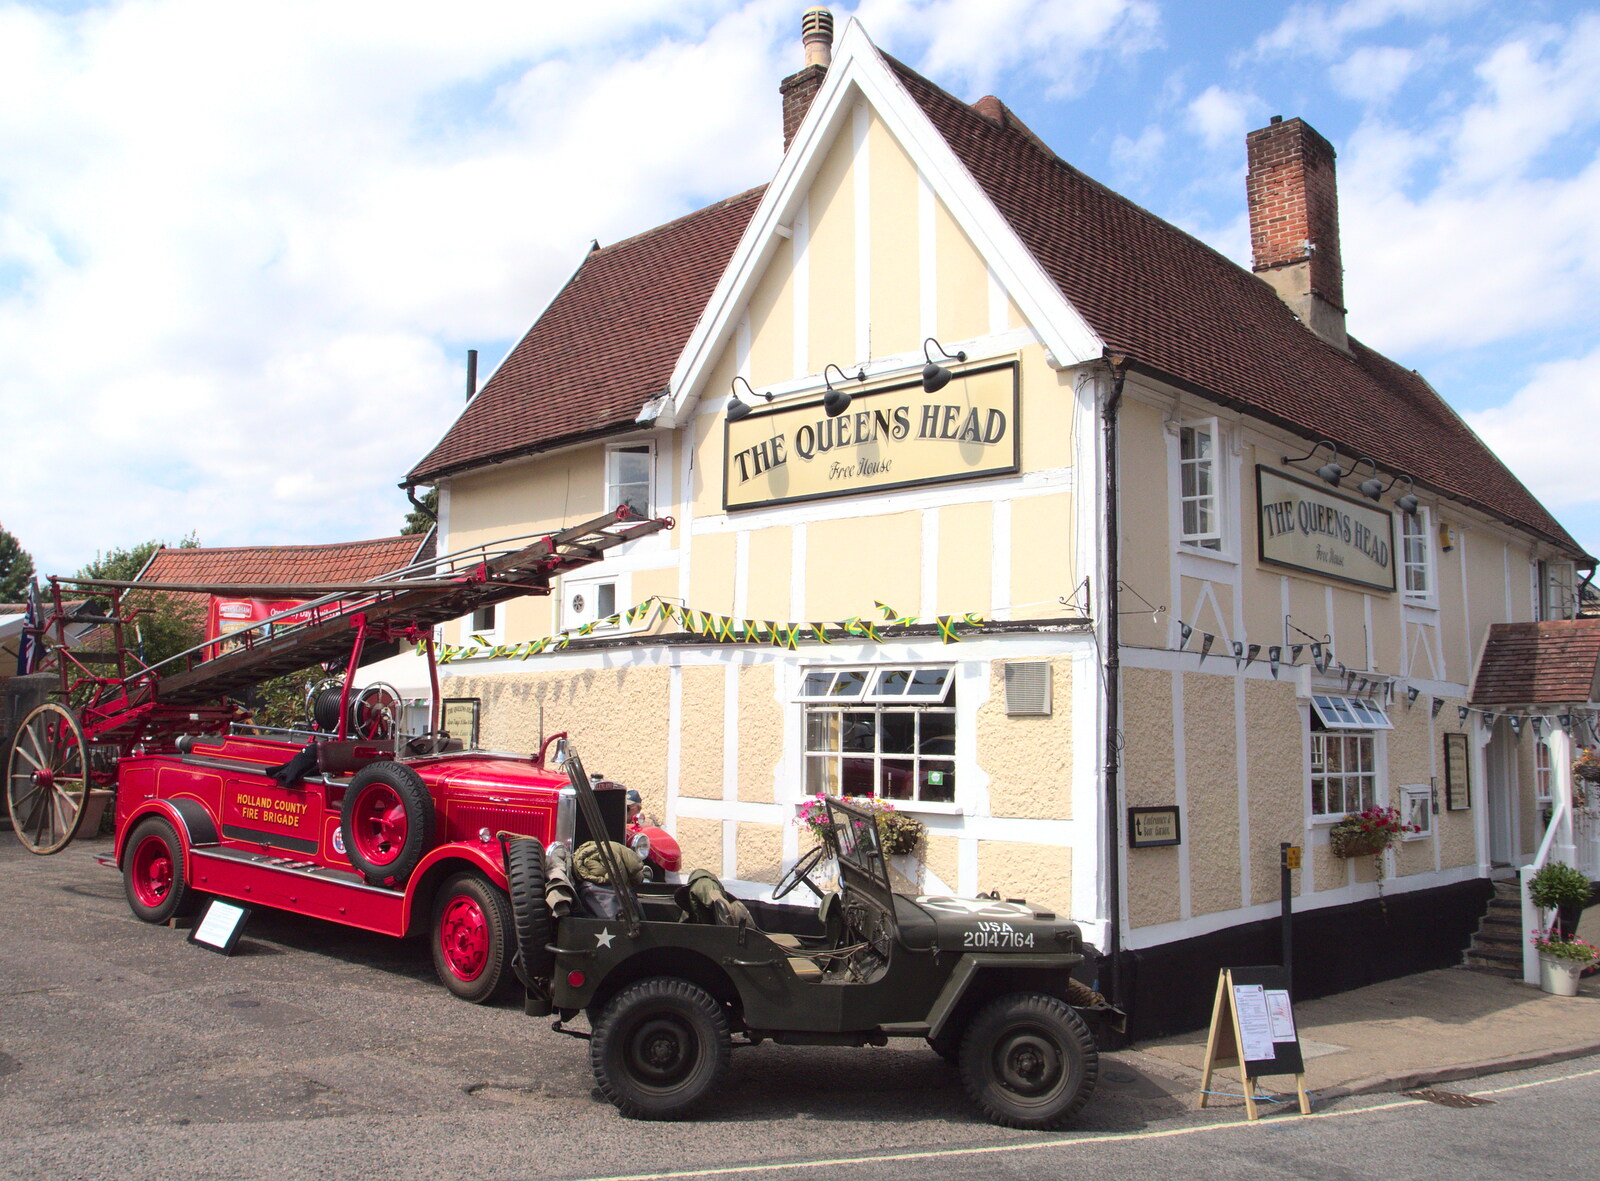 A vintage fire engine outside the Queen's Head from A 1940's Takeover, Eye, Suffolk - 8th August 2015